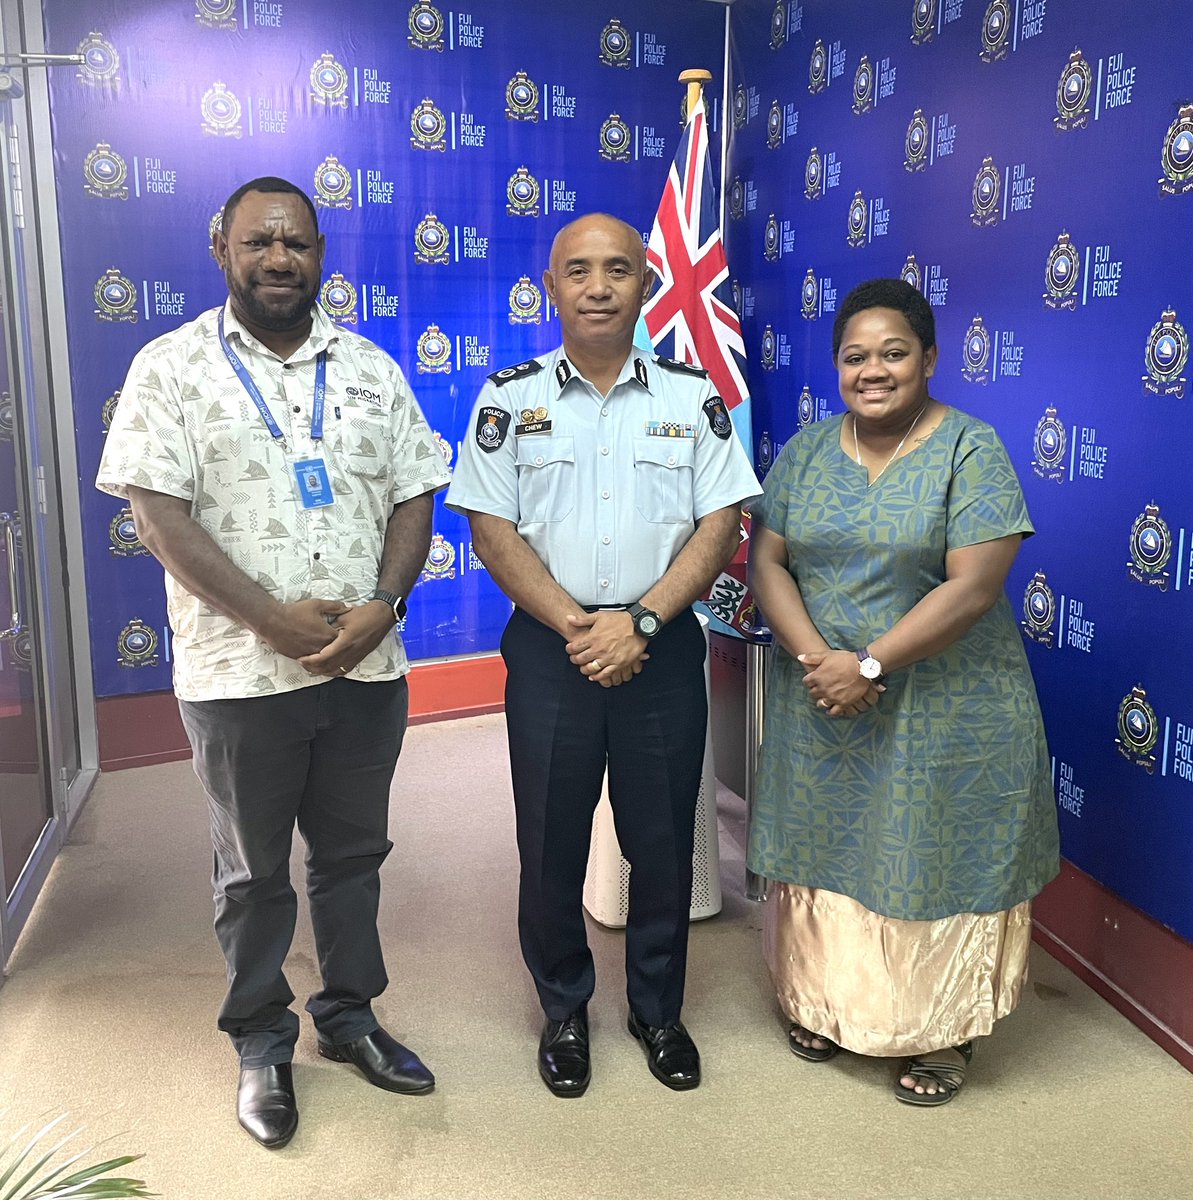 IOM Fiji Chief of Mission met today with Fiji’s Acting Commissioner for Police Mr. Juki Fong Chew to discuss cooperation with Fiji Police Force on strengthening their capacity to deal with online and technology-based trafficking in persons